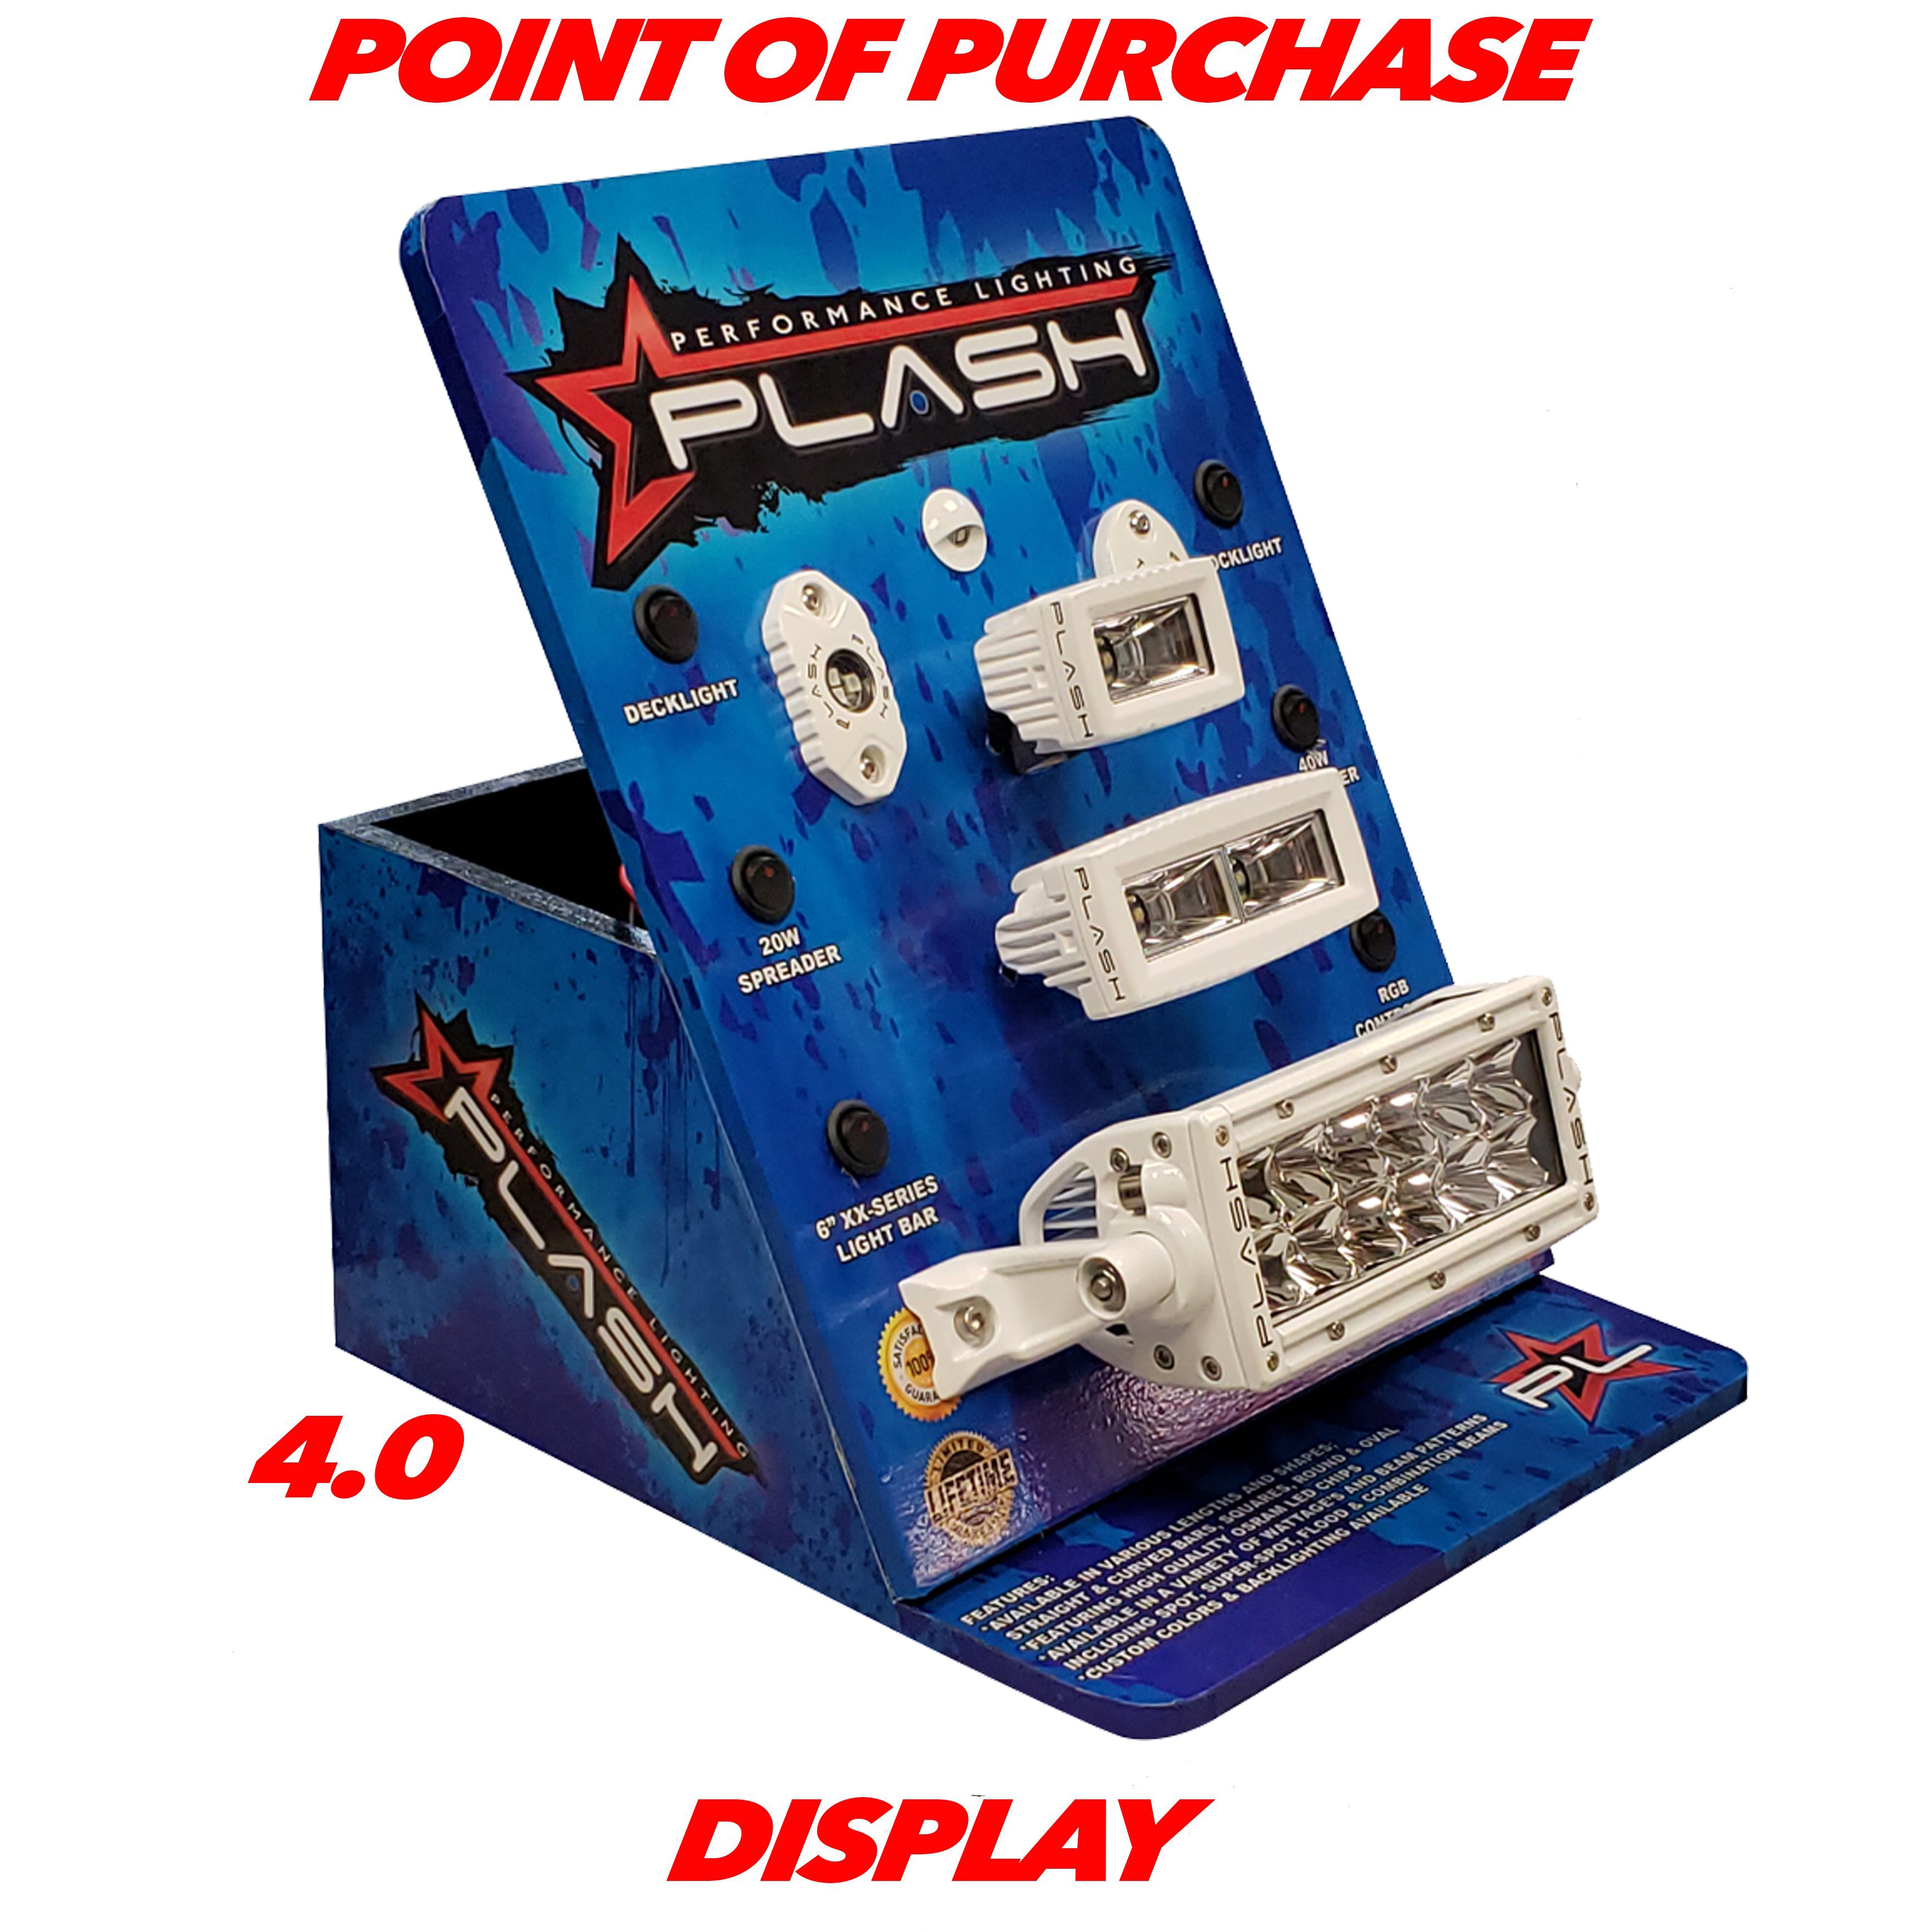 MARINE LED POINT OF PURCHASE DISPLAY